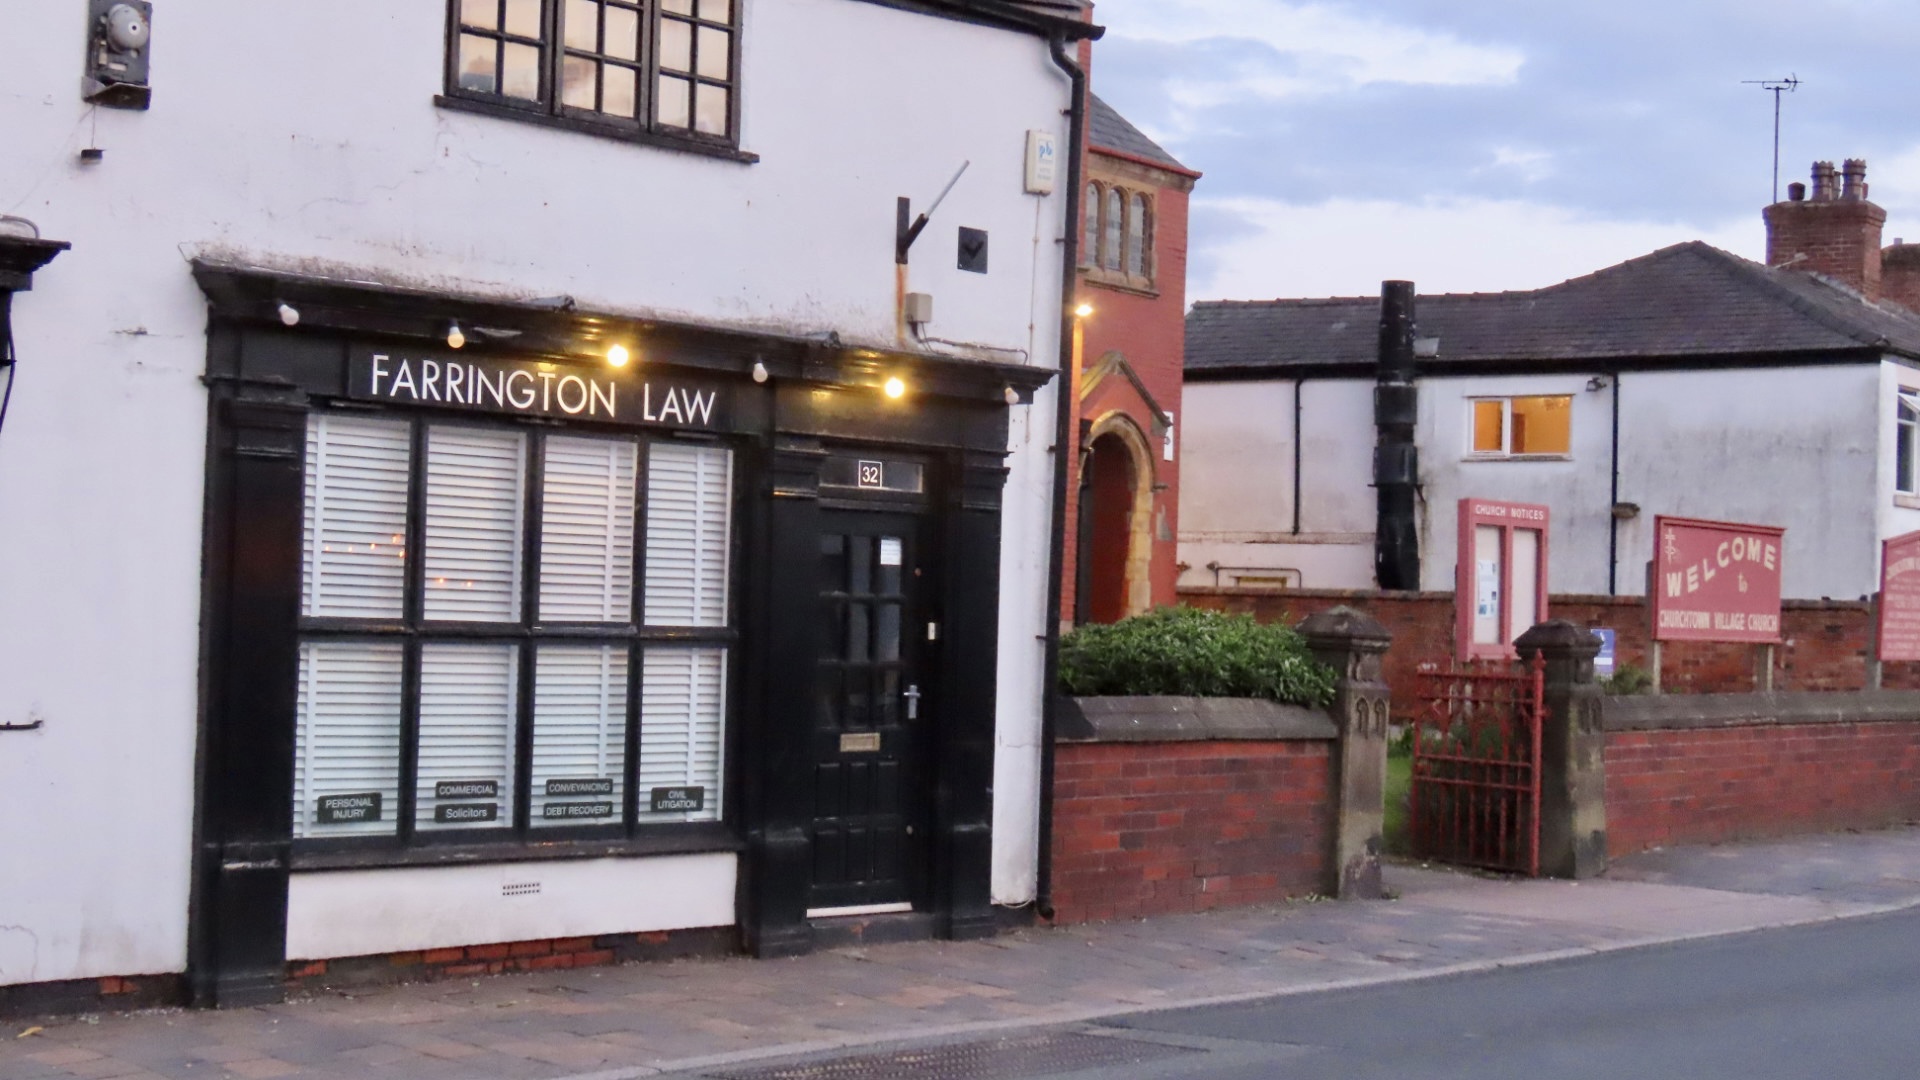 Farrington Law in Churchtown in Southport. 